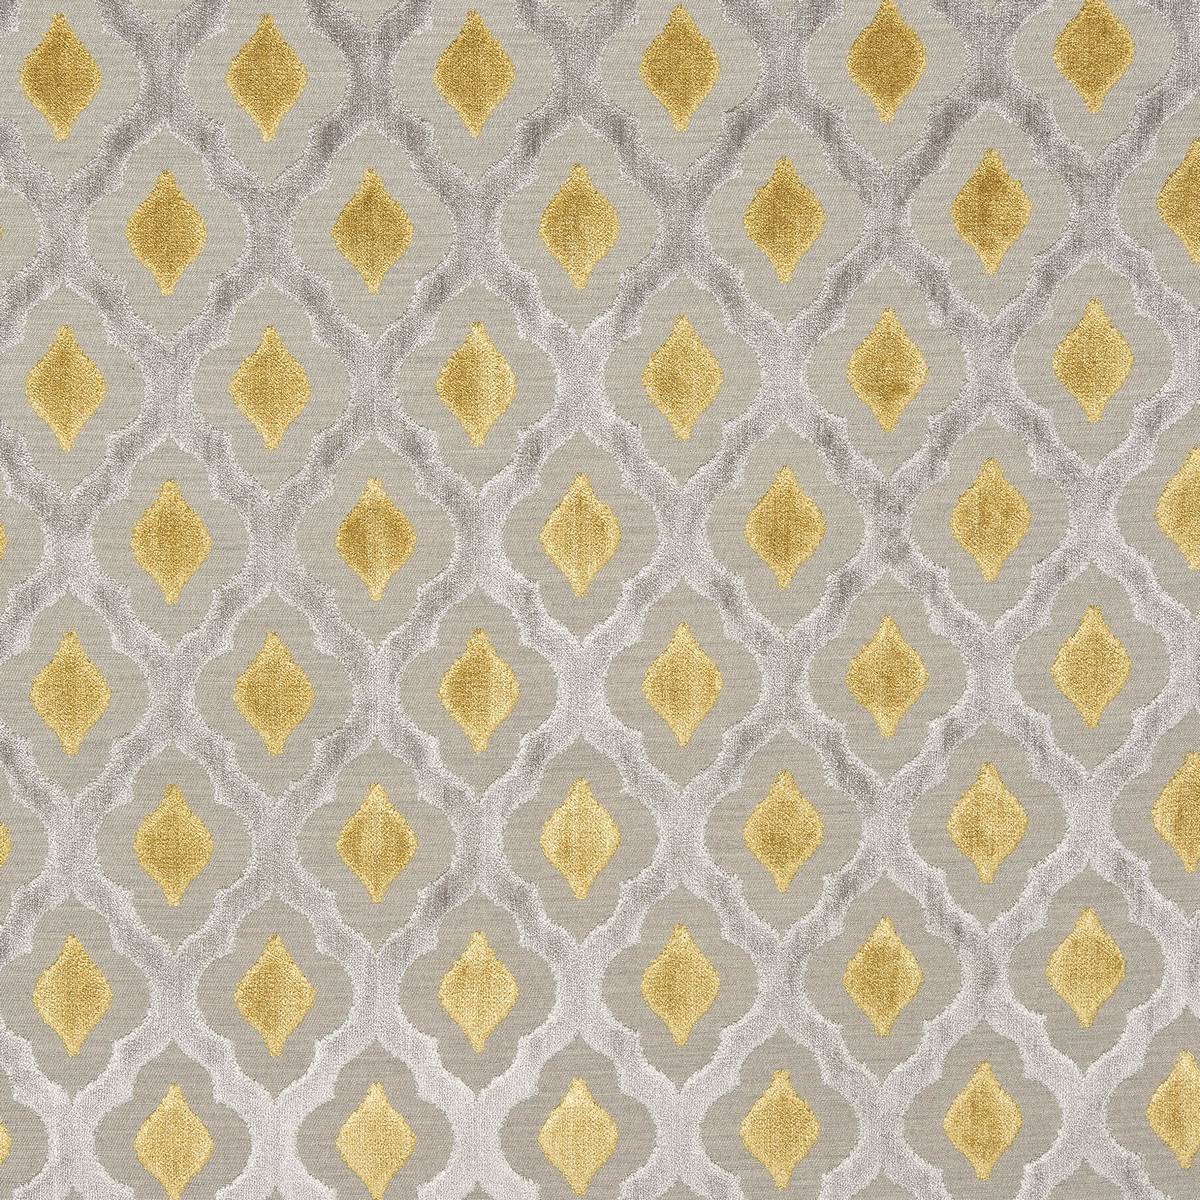 Assisi Ochre Fabric by Porter & Stone